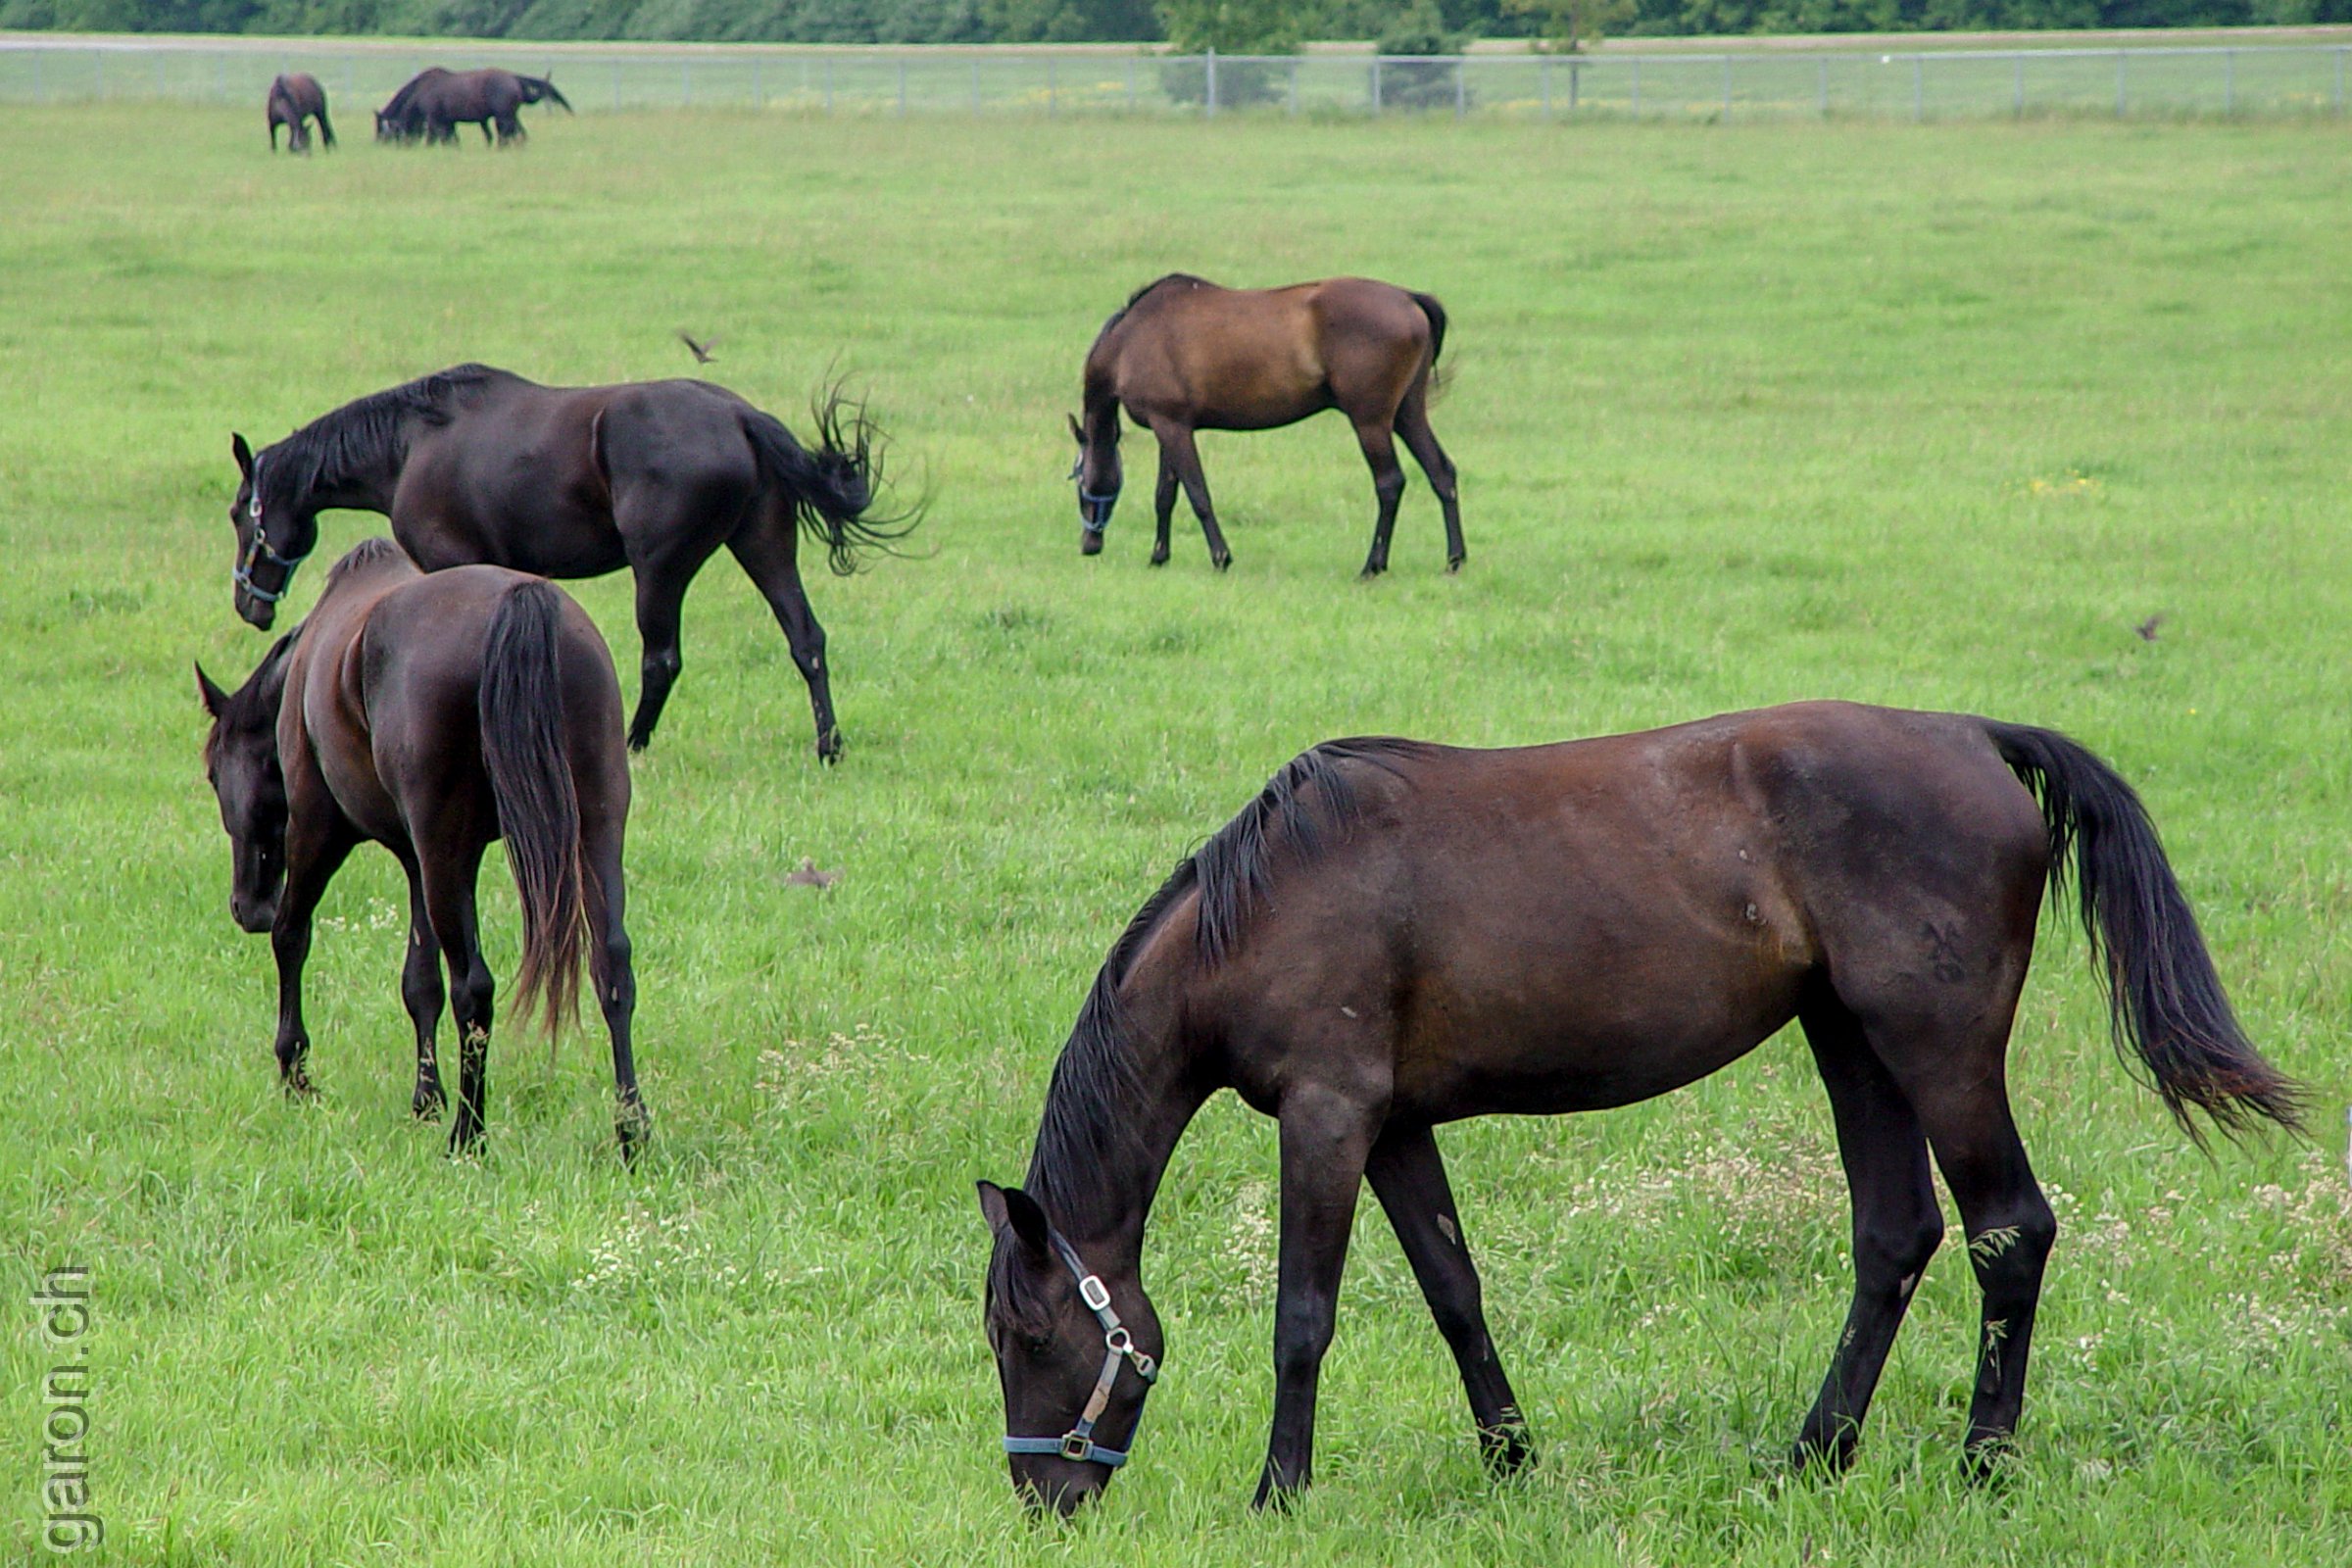 Ontario, RCMP Horses in Ottawa grazing in the field of the Headquarters